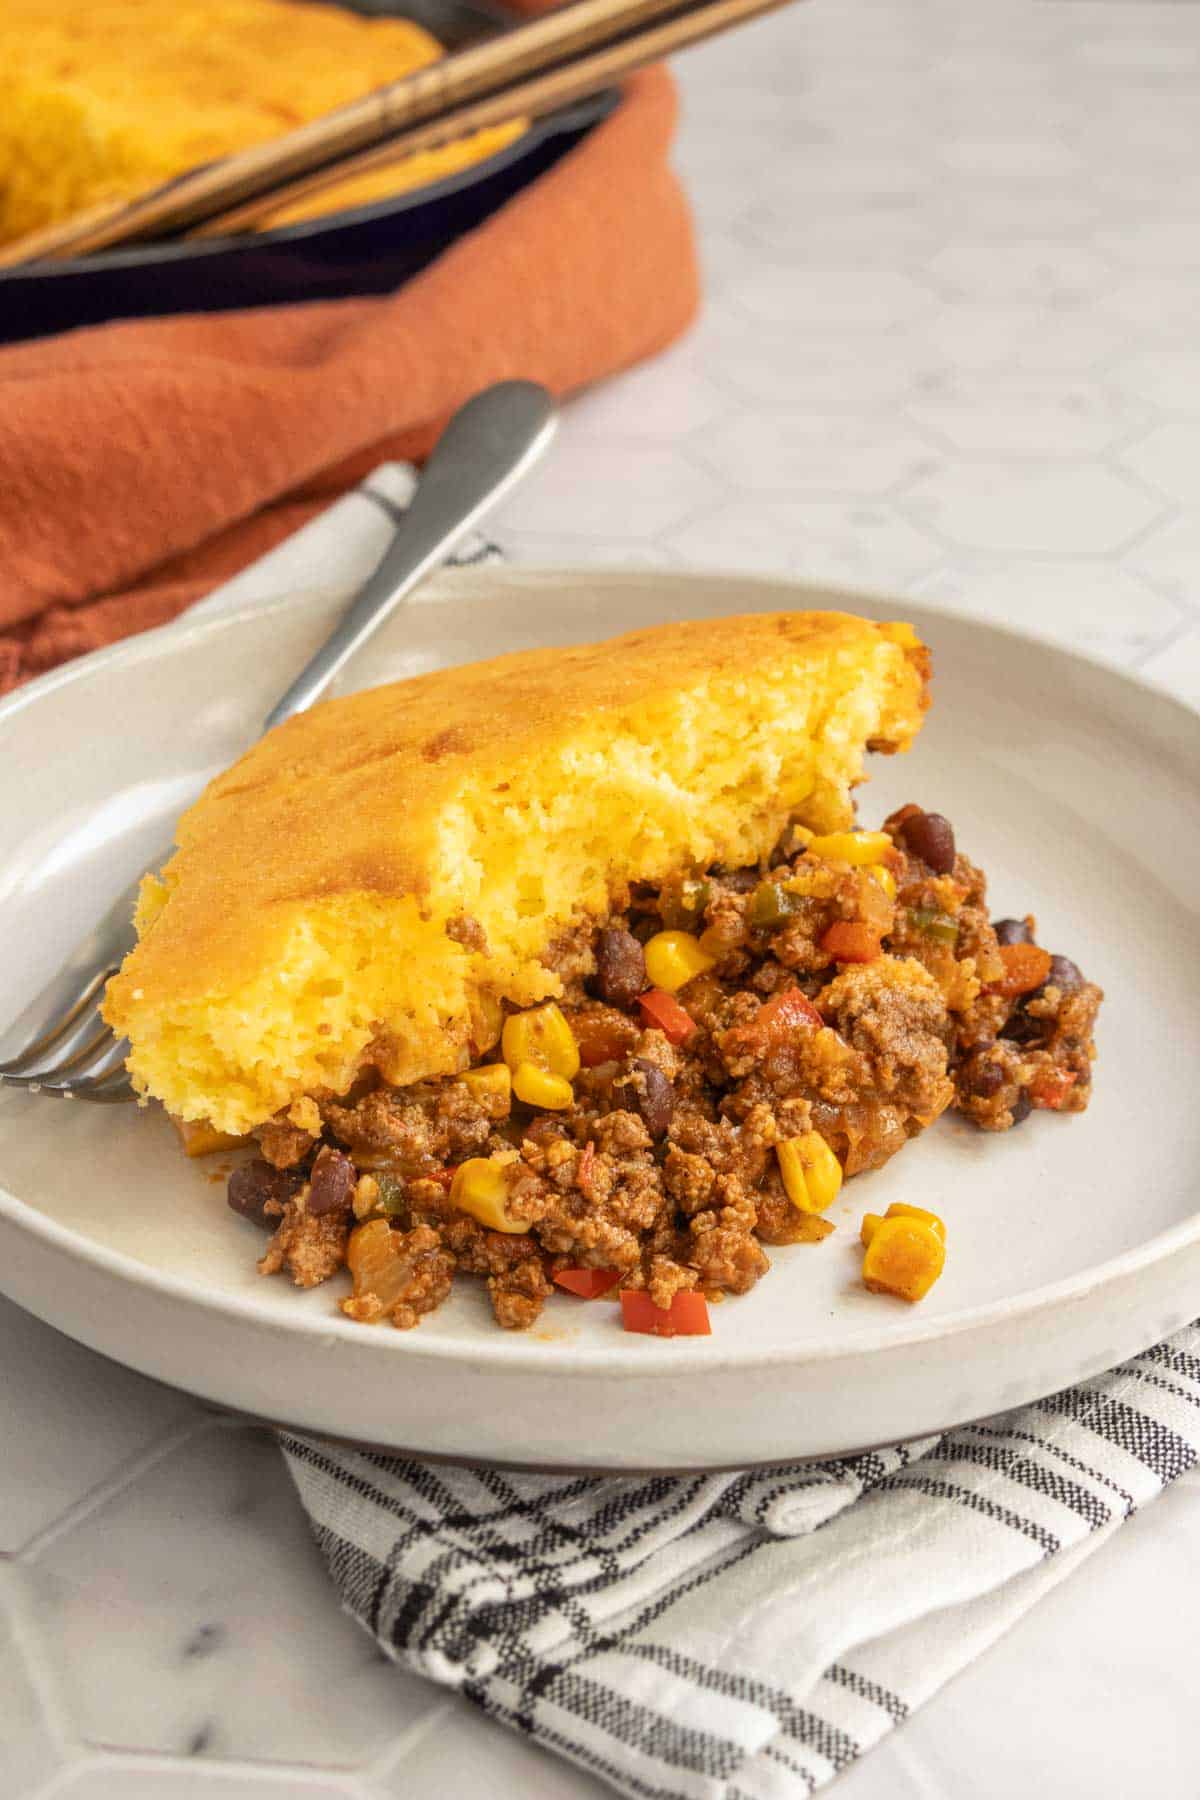 A slice of cornbread casserole with a beef and vegetable filling on a white plate.